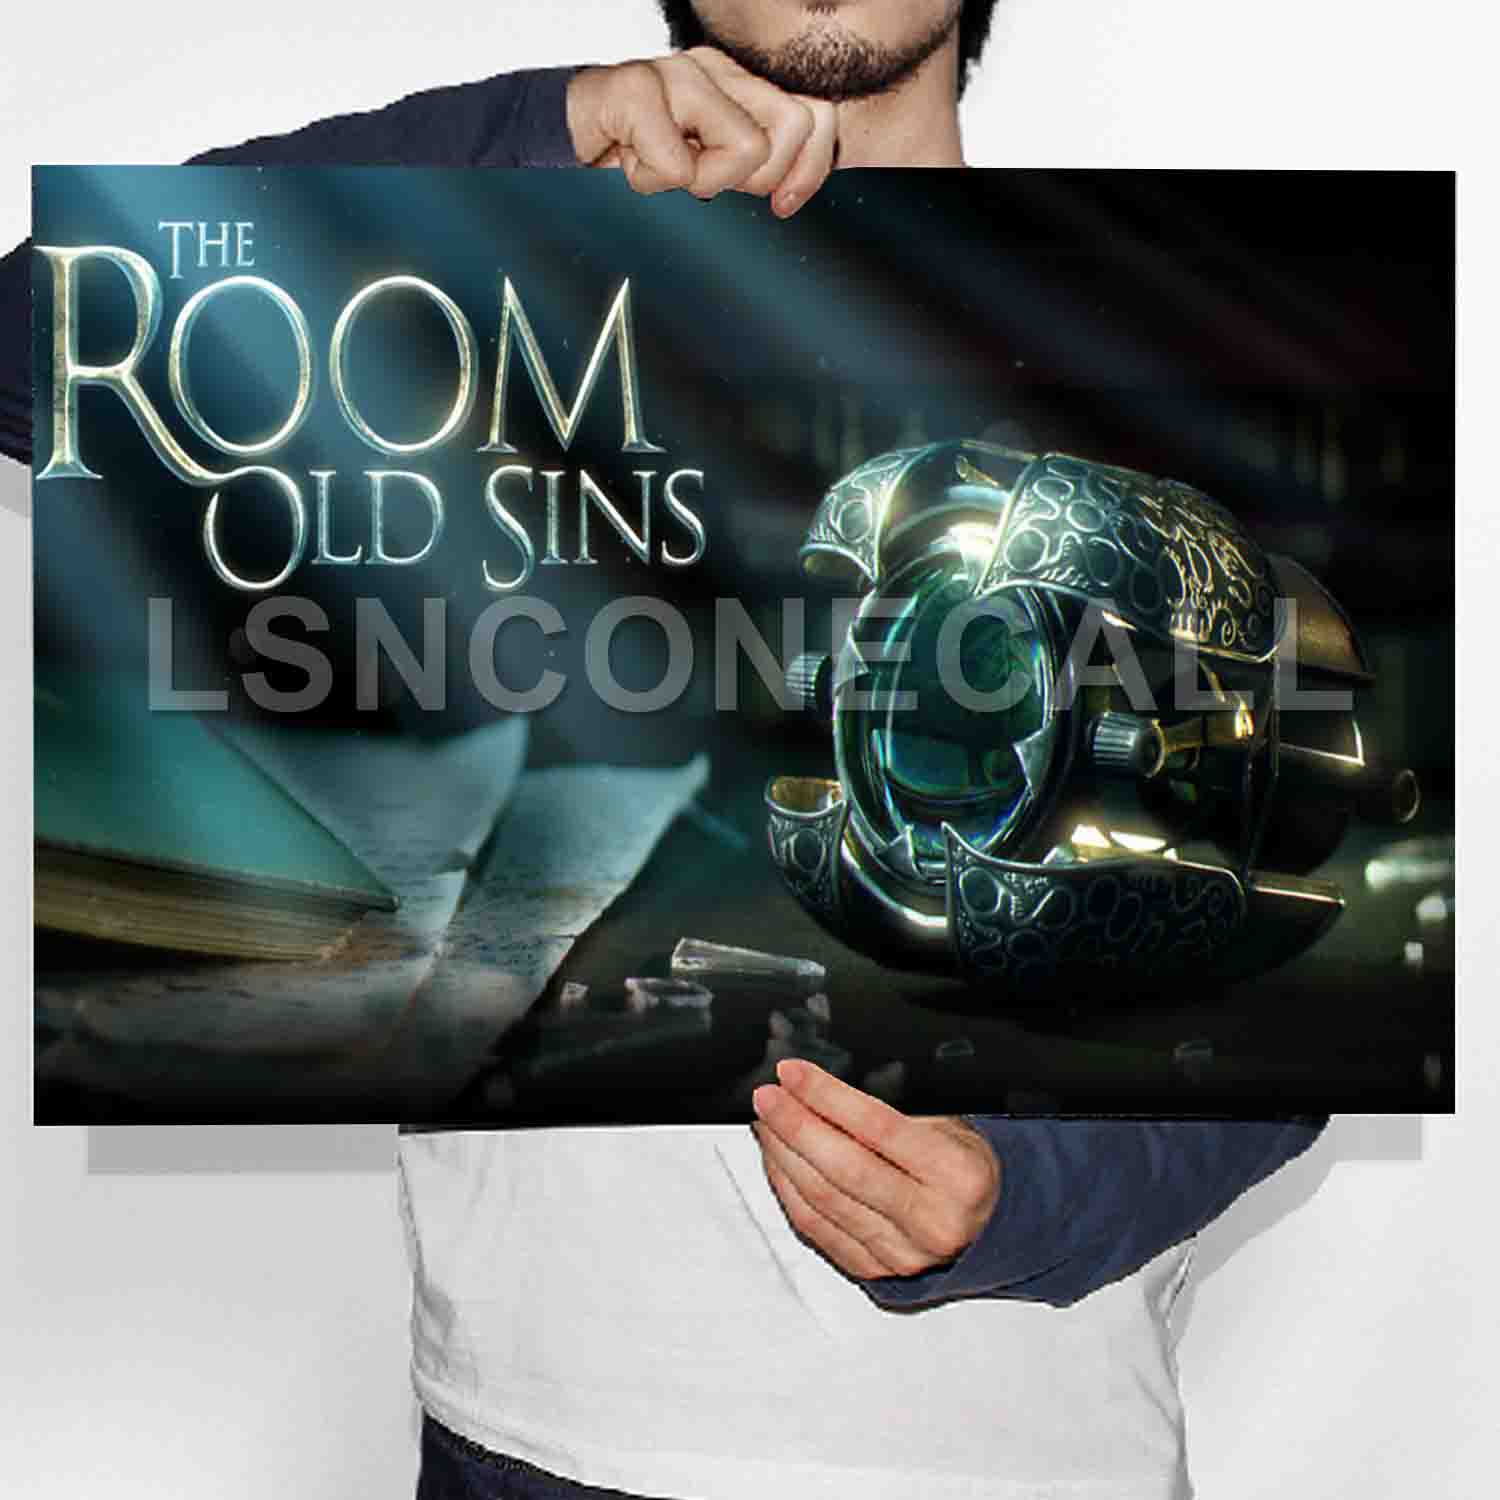 free download the room old sins pc